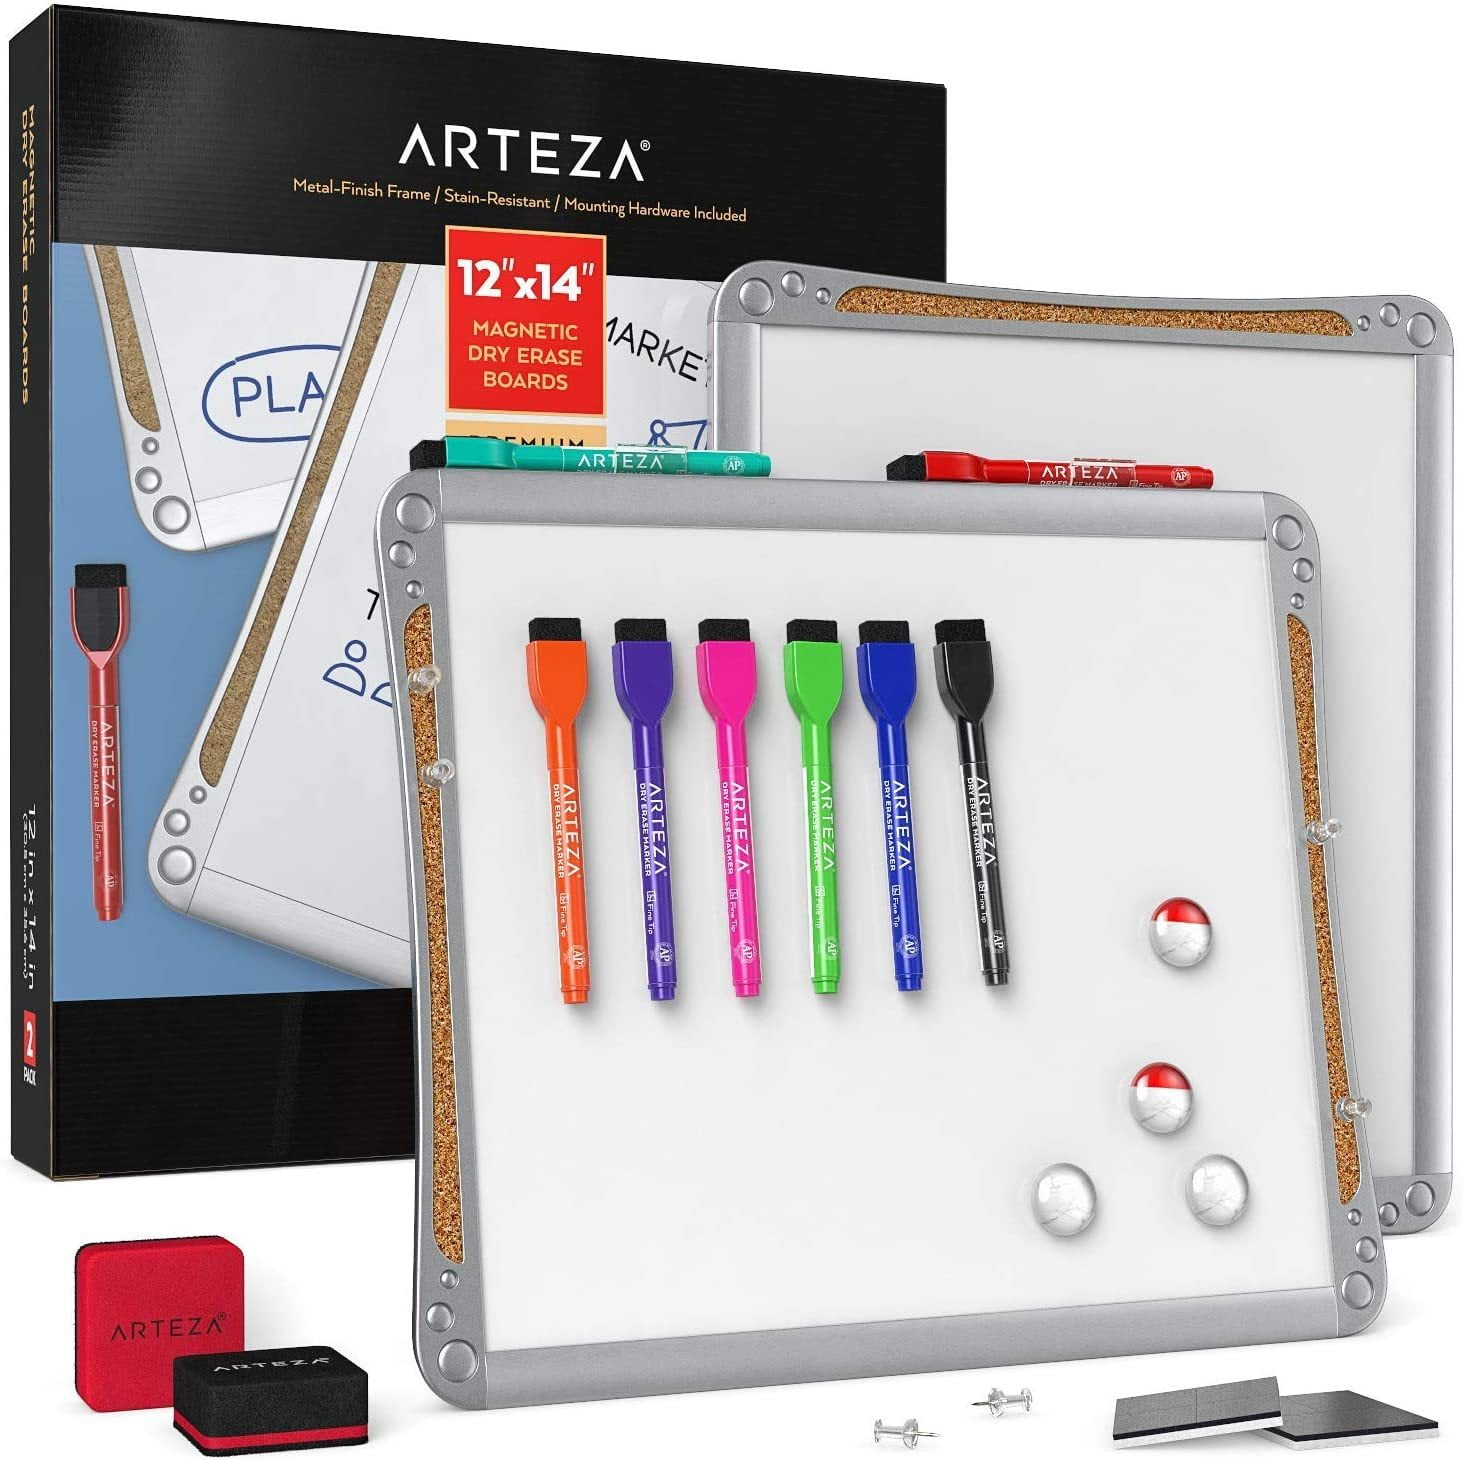 BAZIC Magnetic Dry Erase Board with Marker and 2 Magnets 8.5 X 11 Metallic Frame 